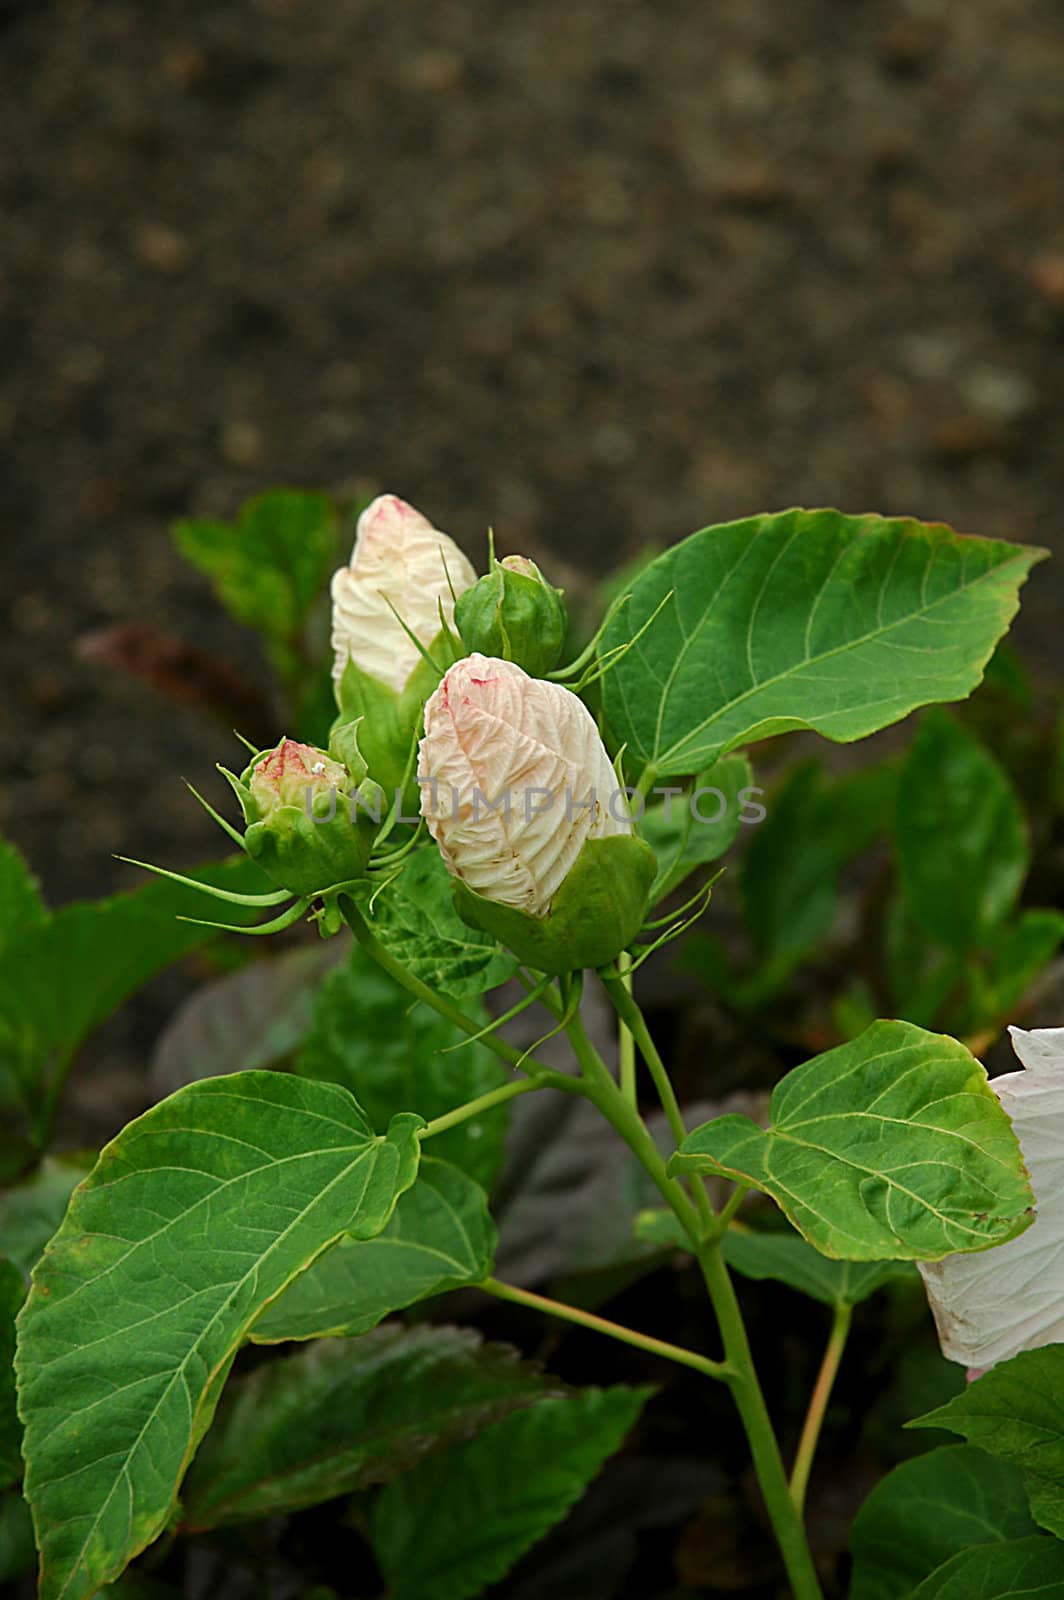 Three pink flower bud with green leaves